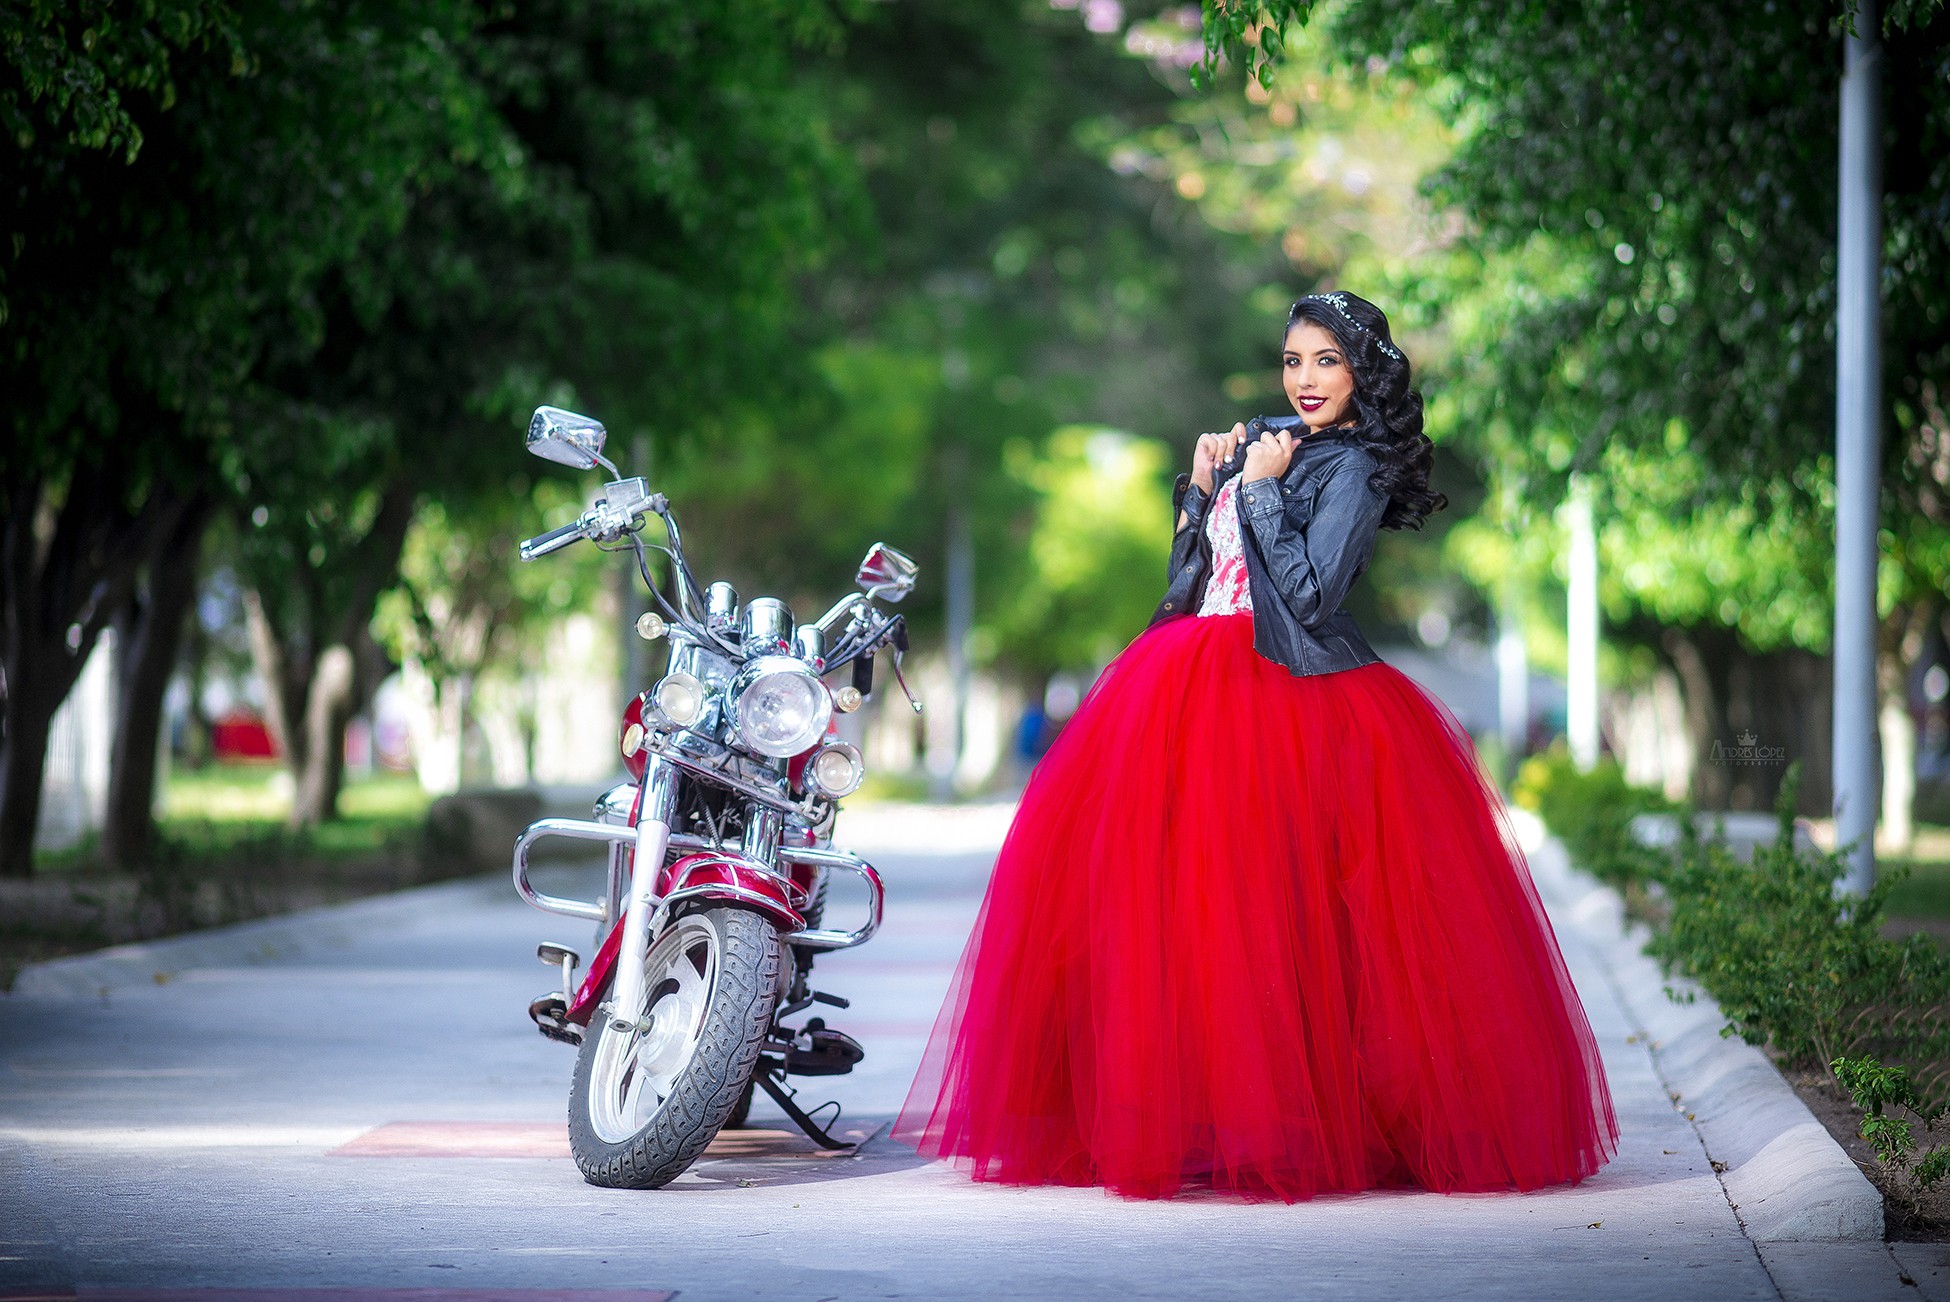 People 1950x1302 women motorcycle model leather jacket outdoors women with motorcycles black hair urban smiling makeup Red Motorcycles standing looking at viewer vehicle